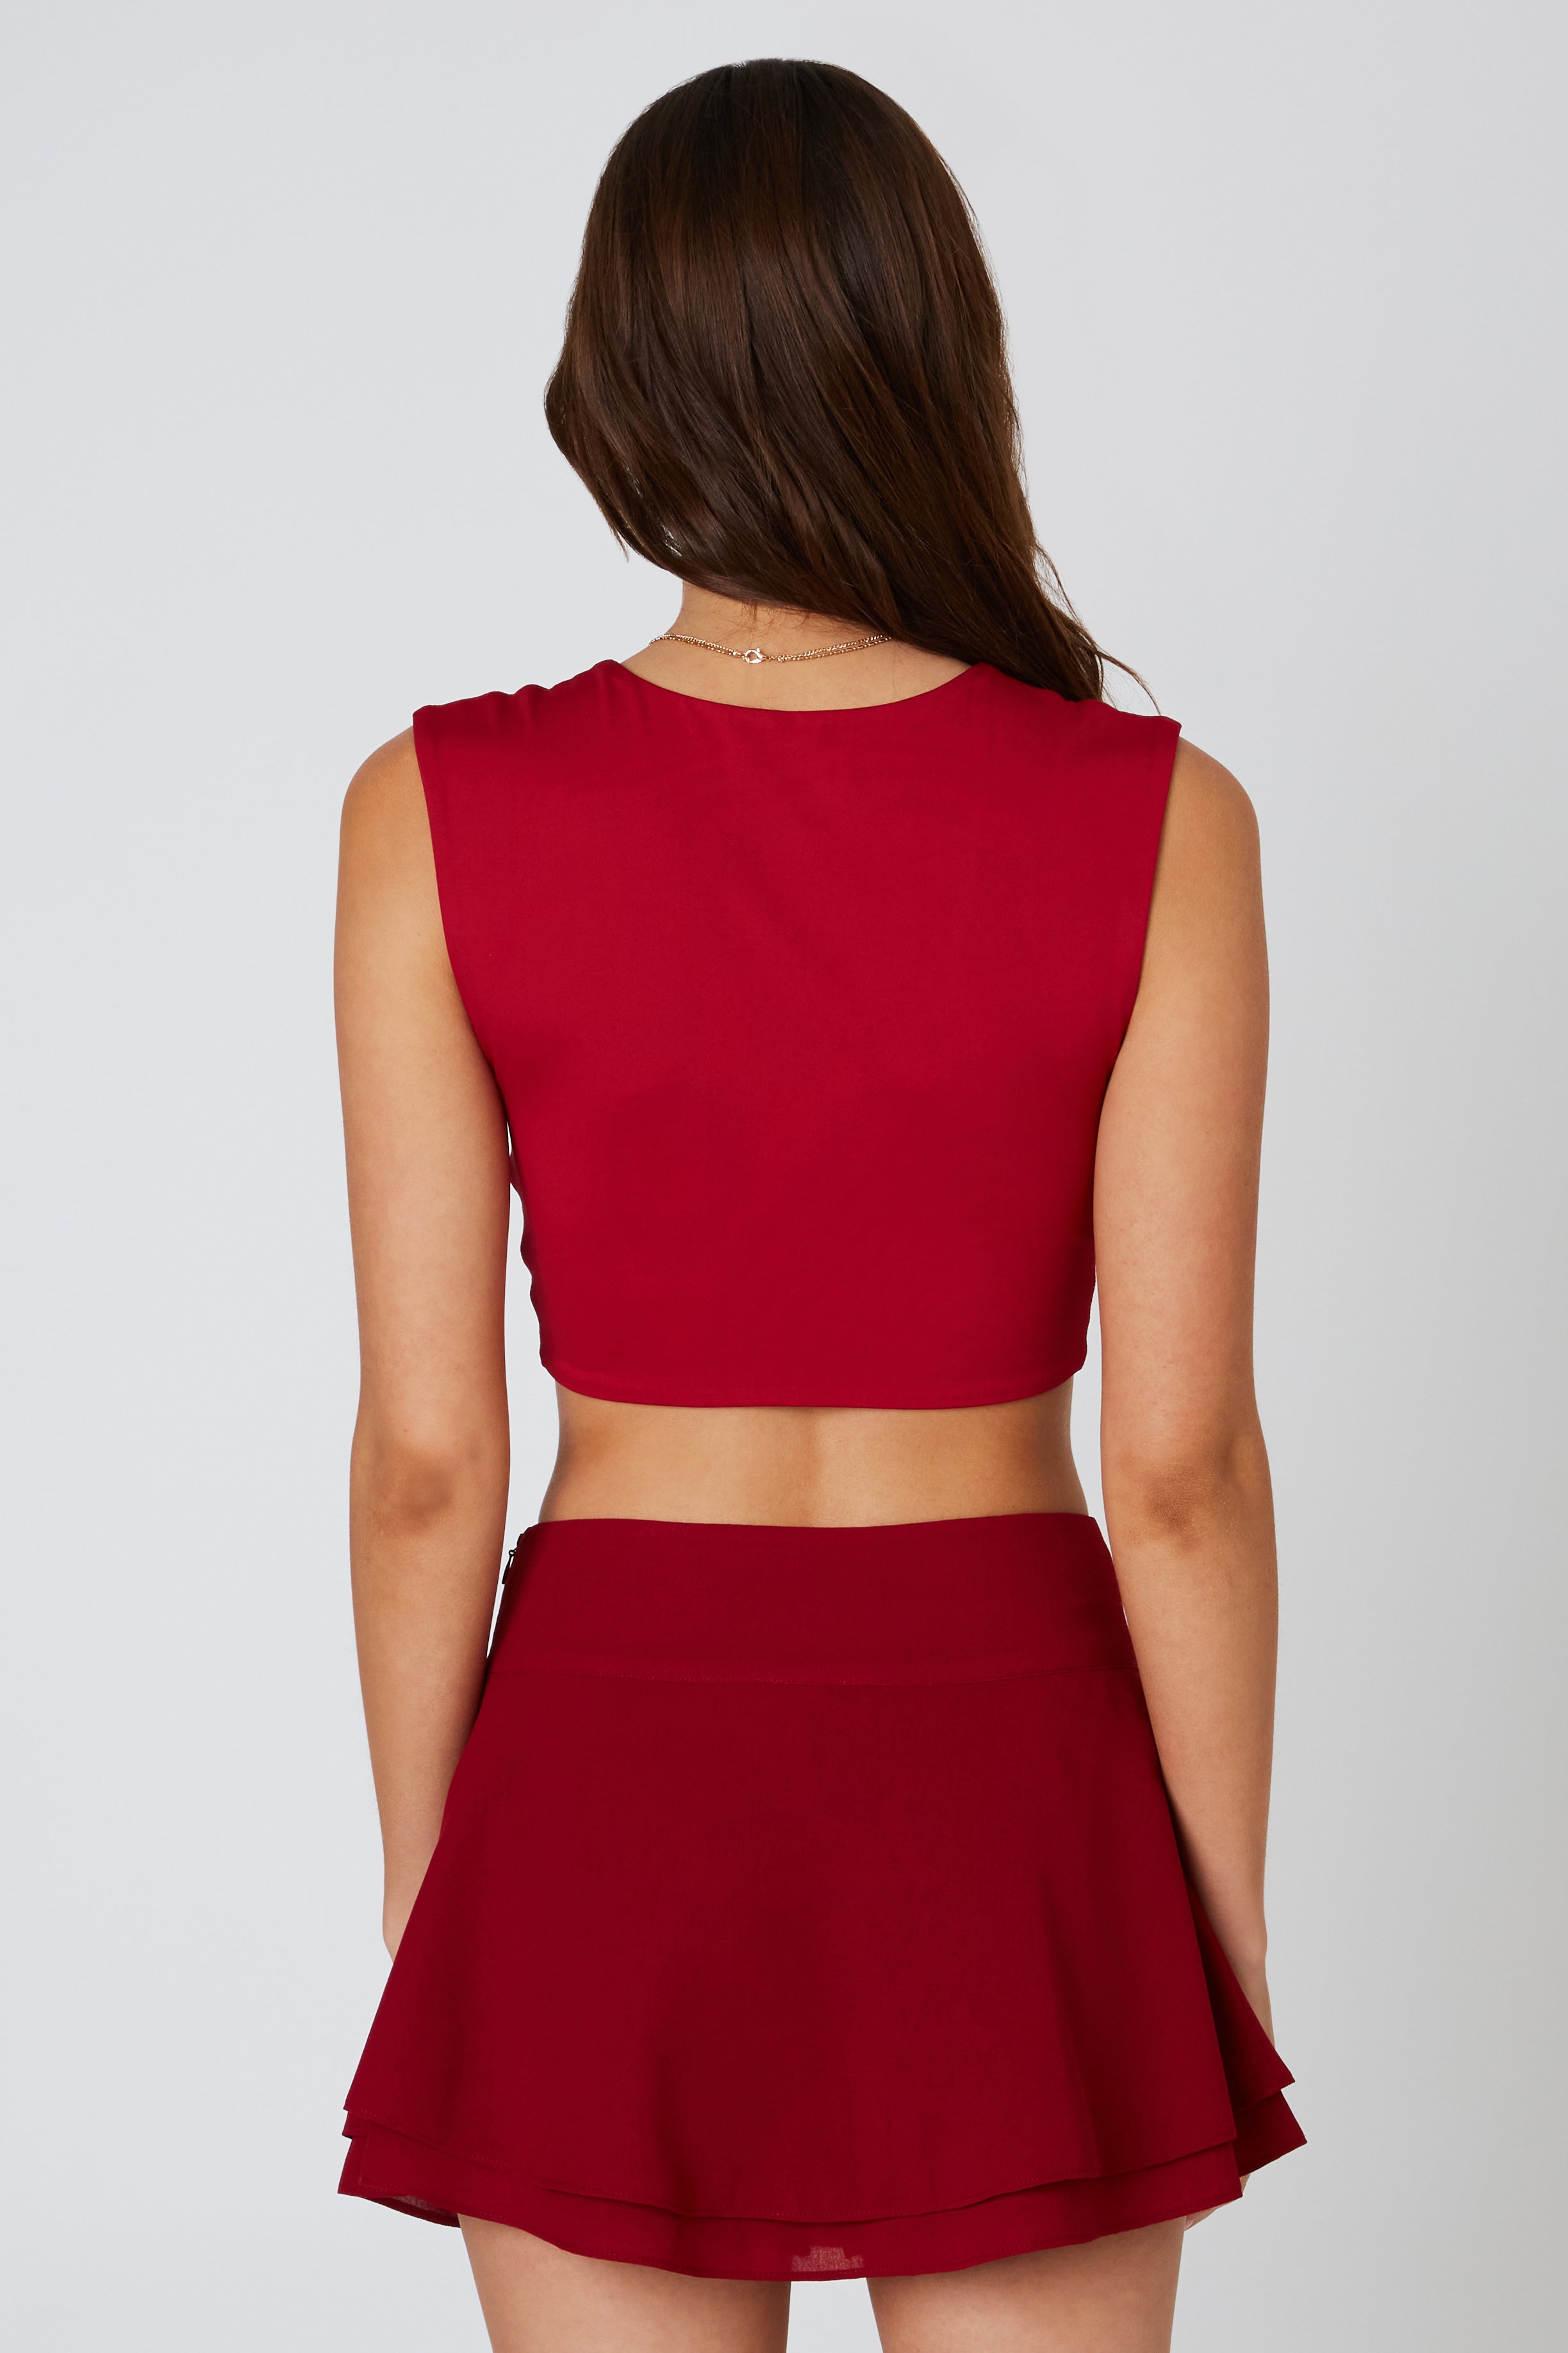 Double Layered Skort in Wine Back View